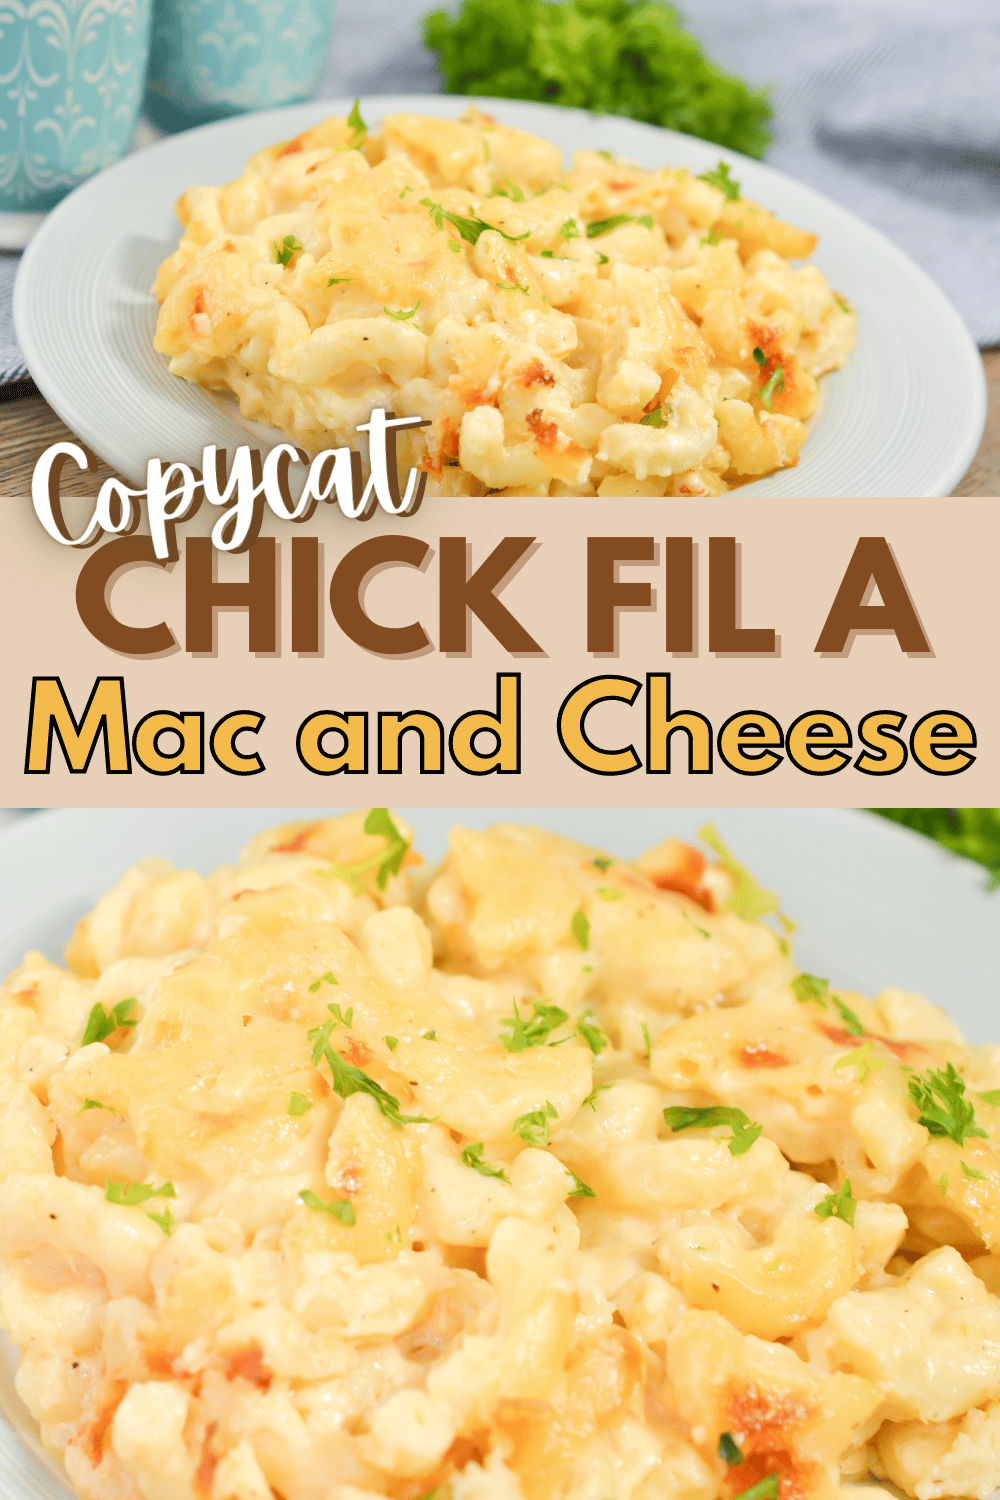 This Copycat Chick fil a Mac and Cheese is creamy, cheesy and oh so delicious! It's easy to make and perfect for busy weeknights. #copycatchickfilamacandcheese #copycatrecipe #copycatchickfila #macandcheese #chickfilamacandcheese via @wondermomwannab